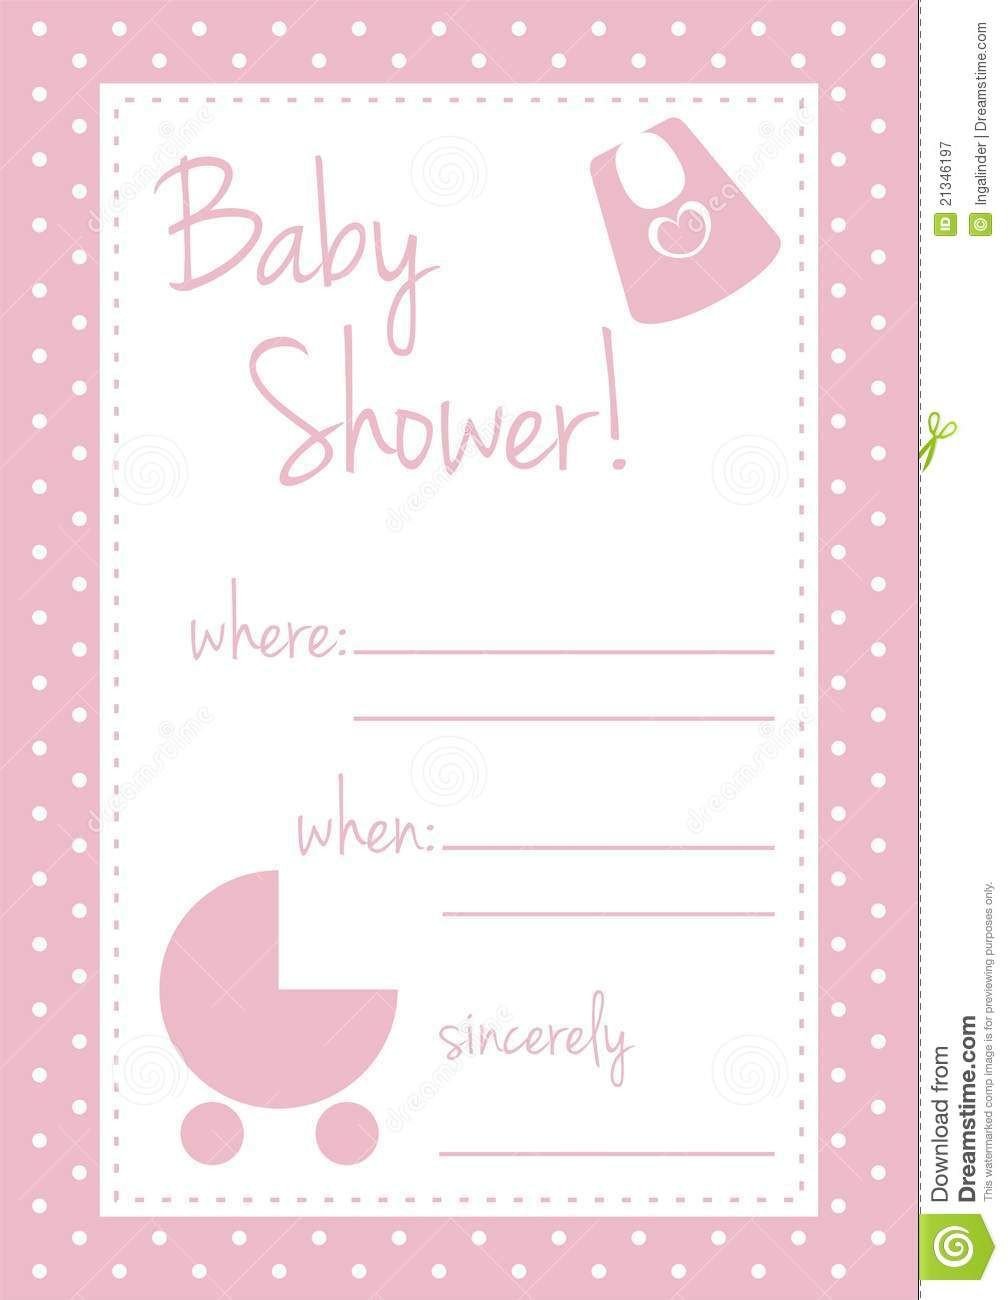 Baby Shower Card Template Baby Shower Invitation Card